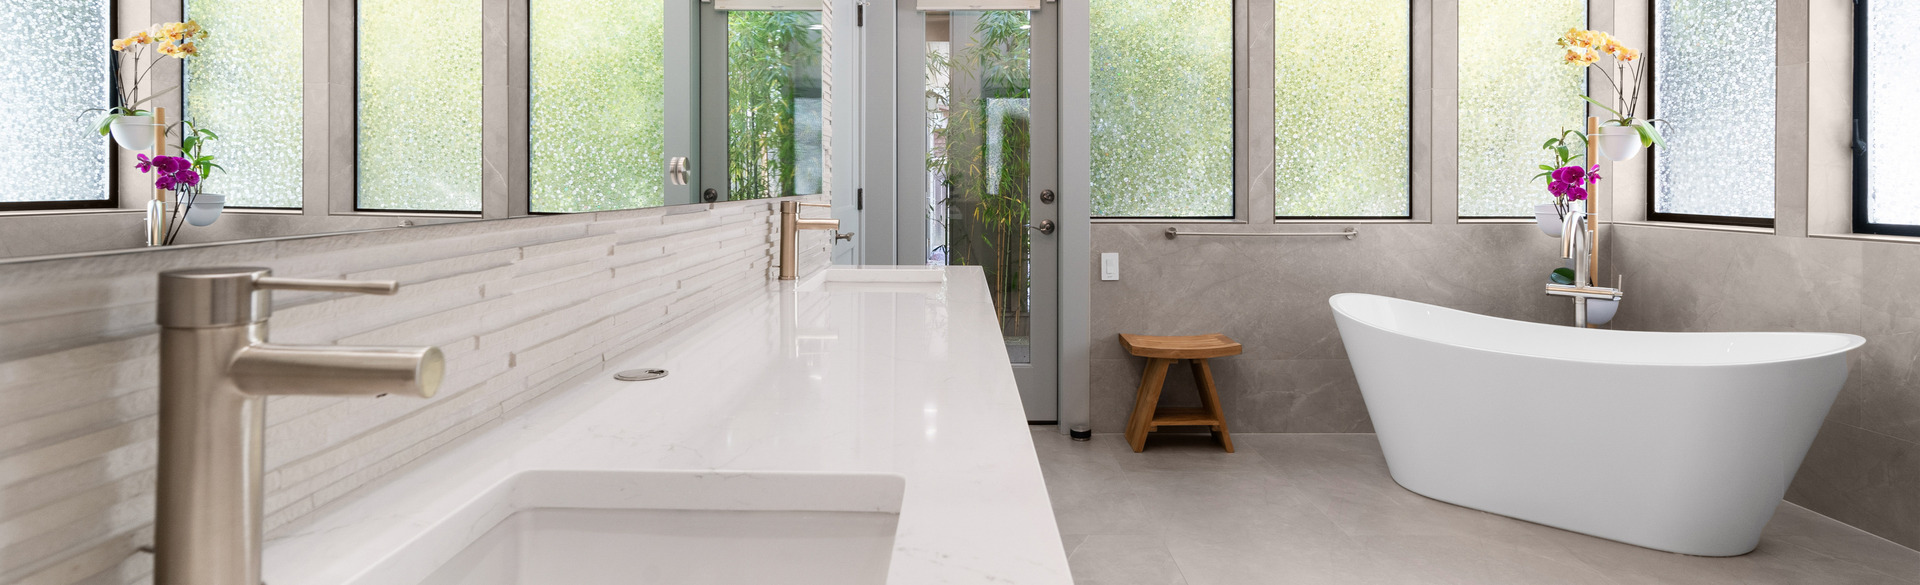 Top 5 Remodeling Projects to Boost Your Seattle Home's Value and Comfort.